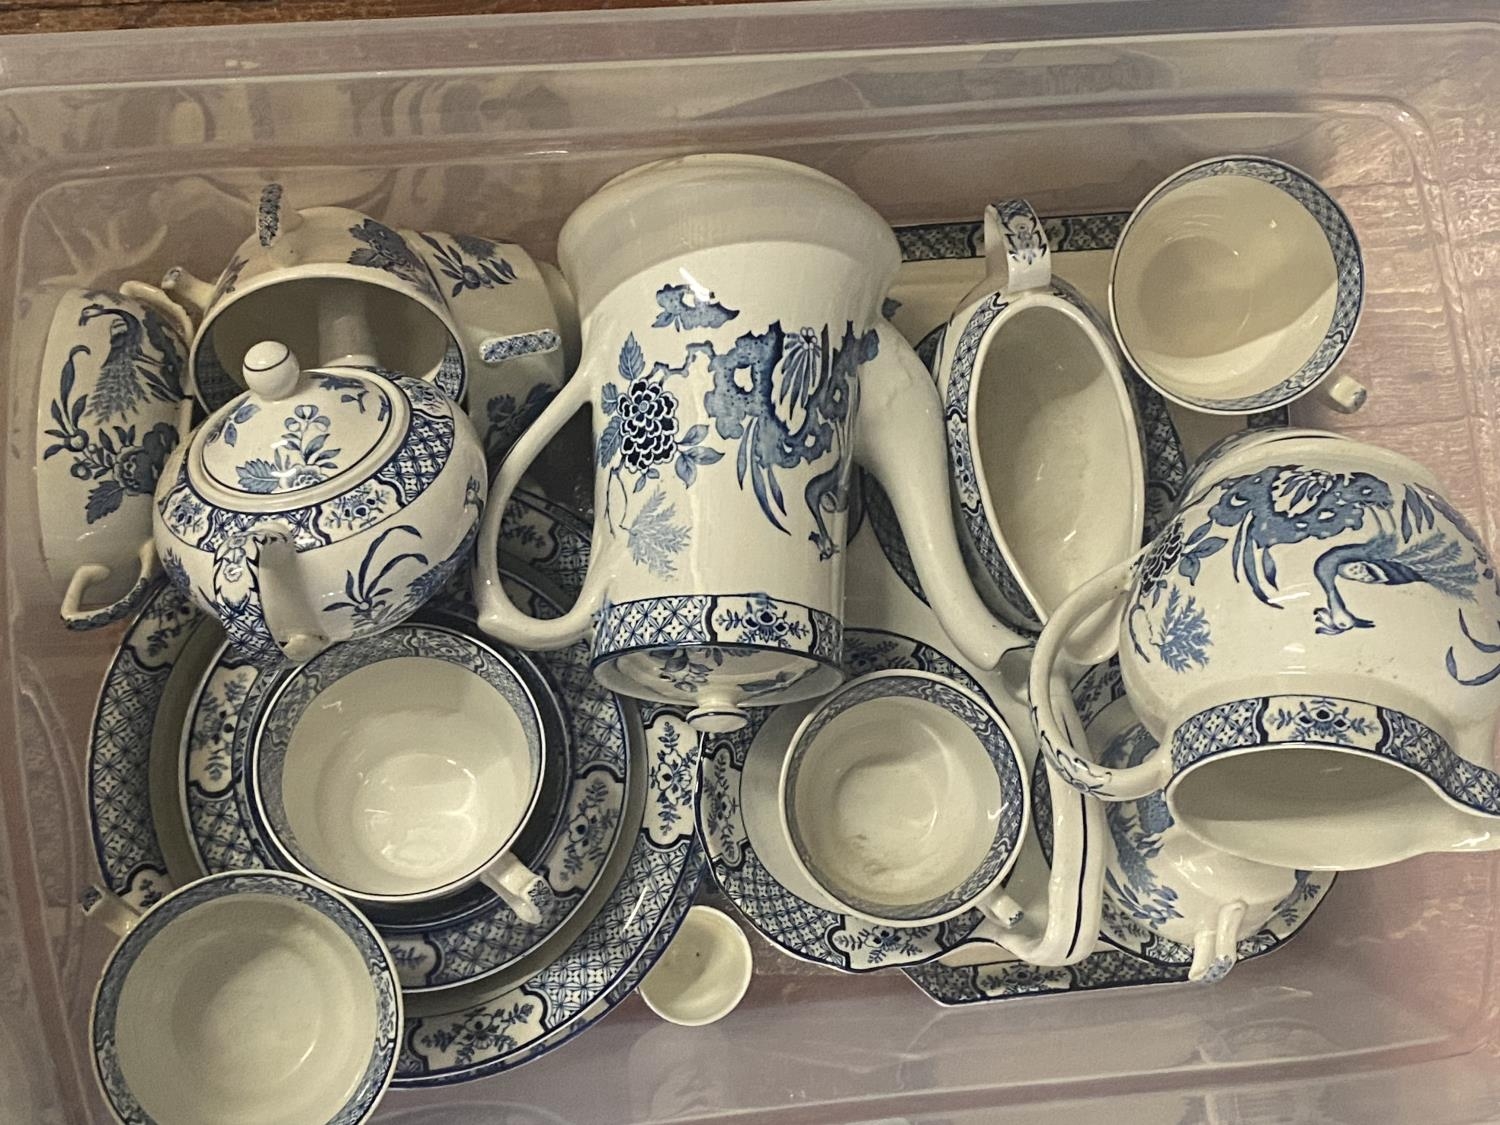 A large selection of Yuan blue & white bone china shipping unavailable.